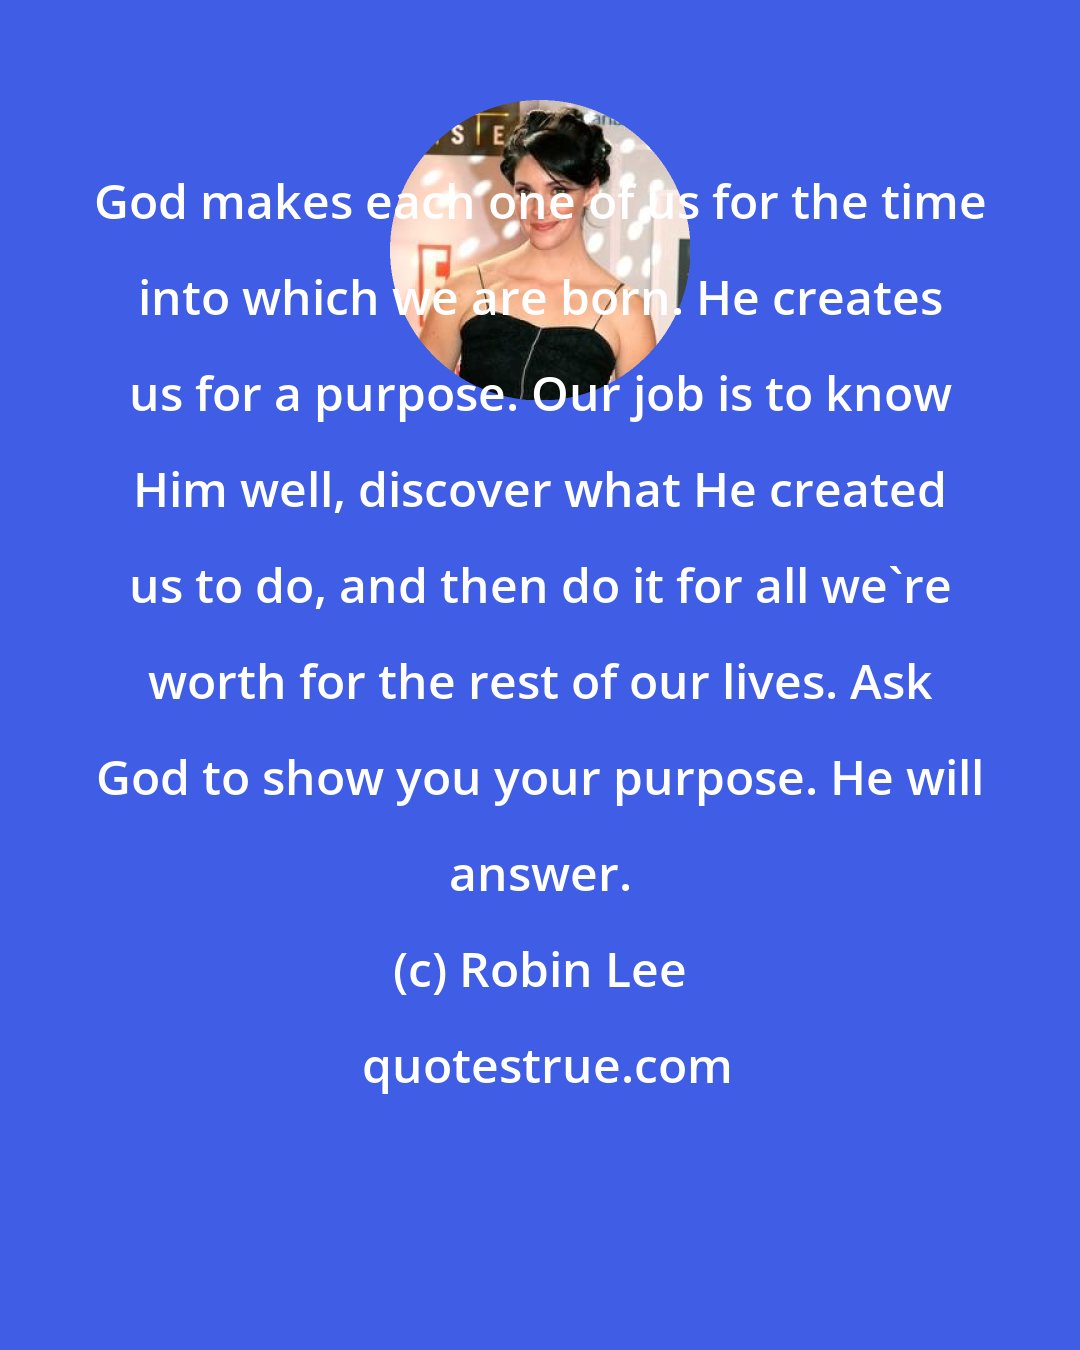 Robin Lee: God makes each one of us for the time into which we are born. He creates us for a purpose. Our job is to know Him well, discover what He created us to do, and then do it for all we're worth for the rest of our lives. Ask God to show you your purpose. He will answer.